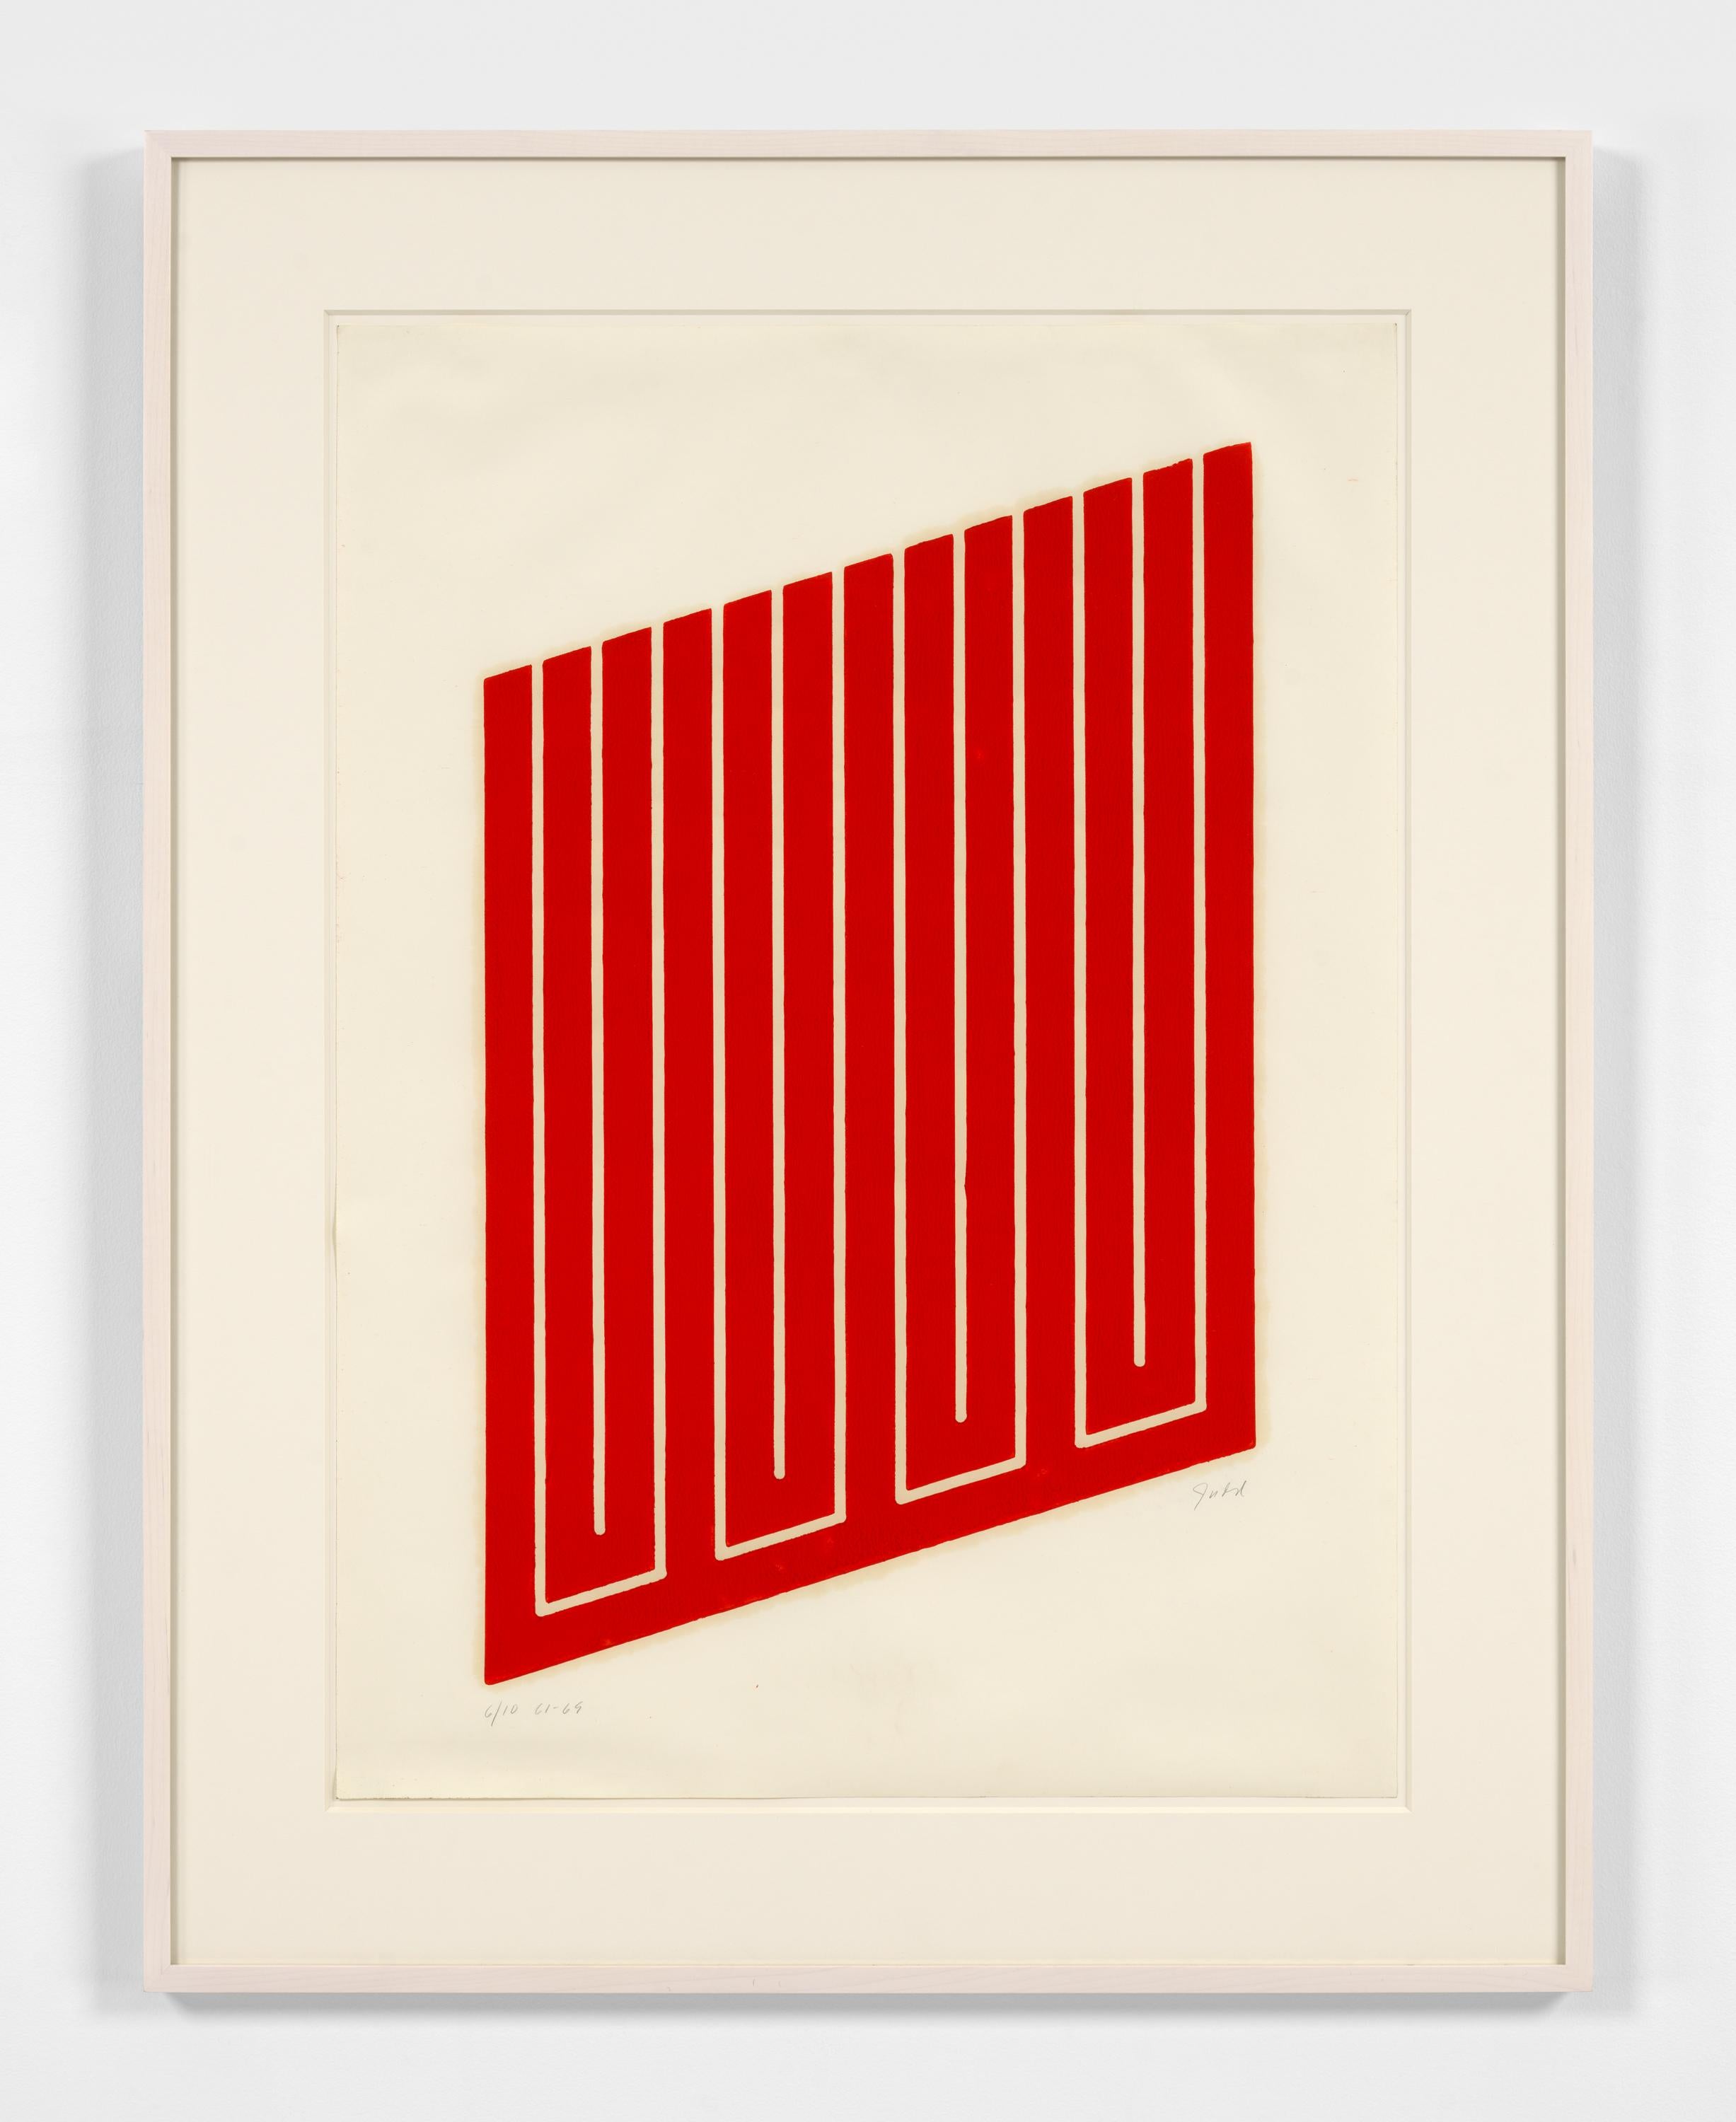 Untitled - Print by Donald Judd